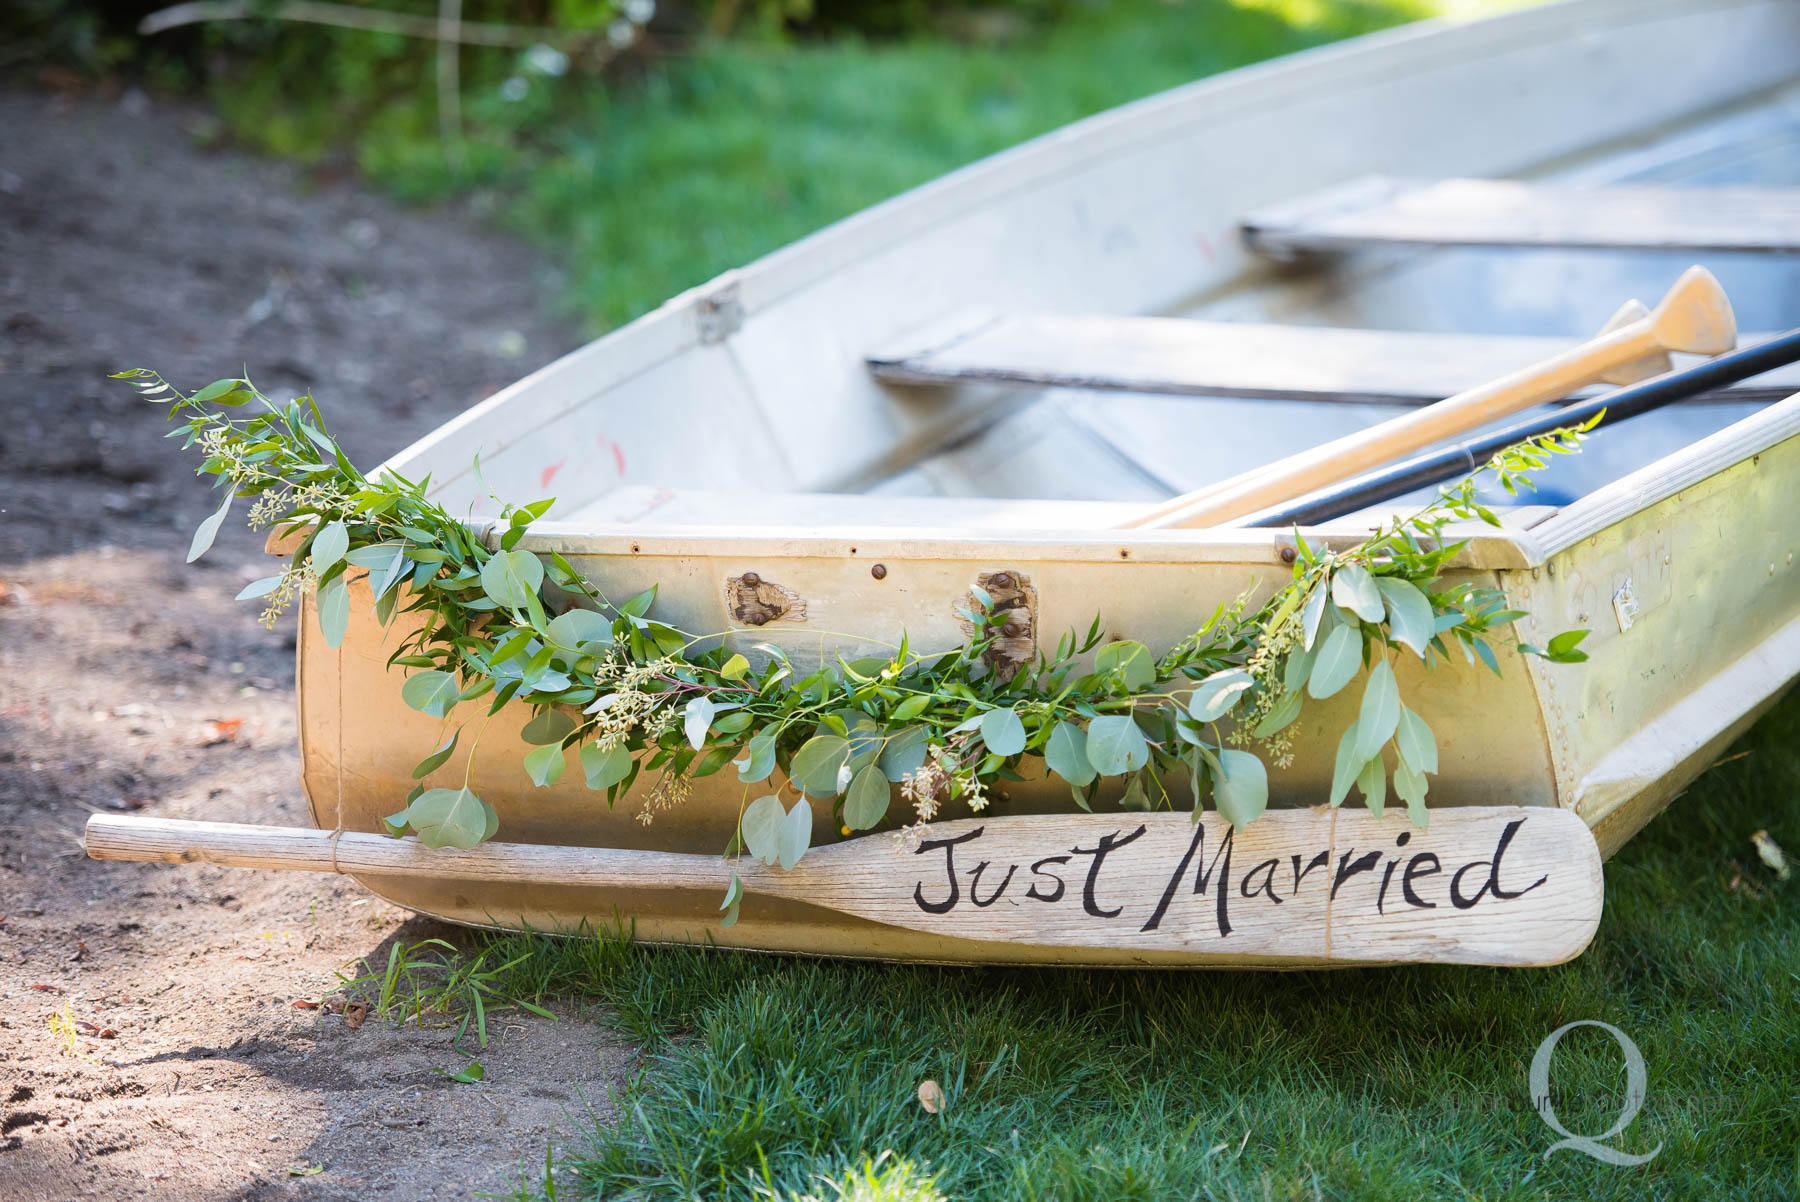 rons pond boat with just married paddle